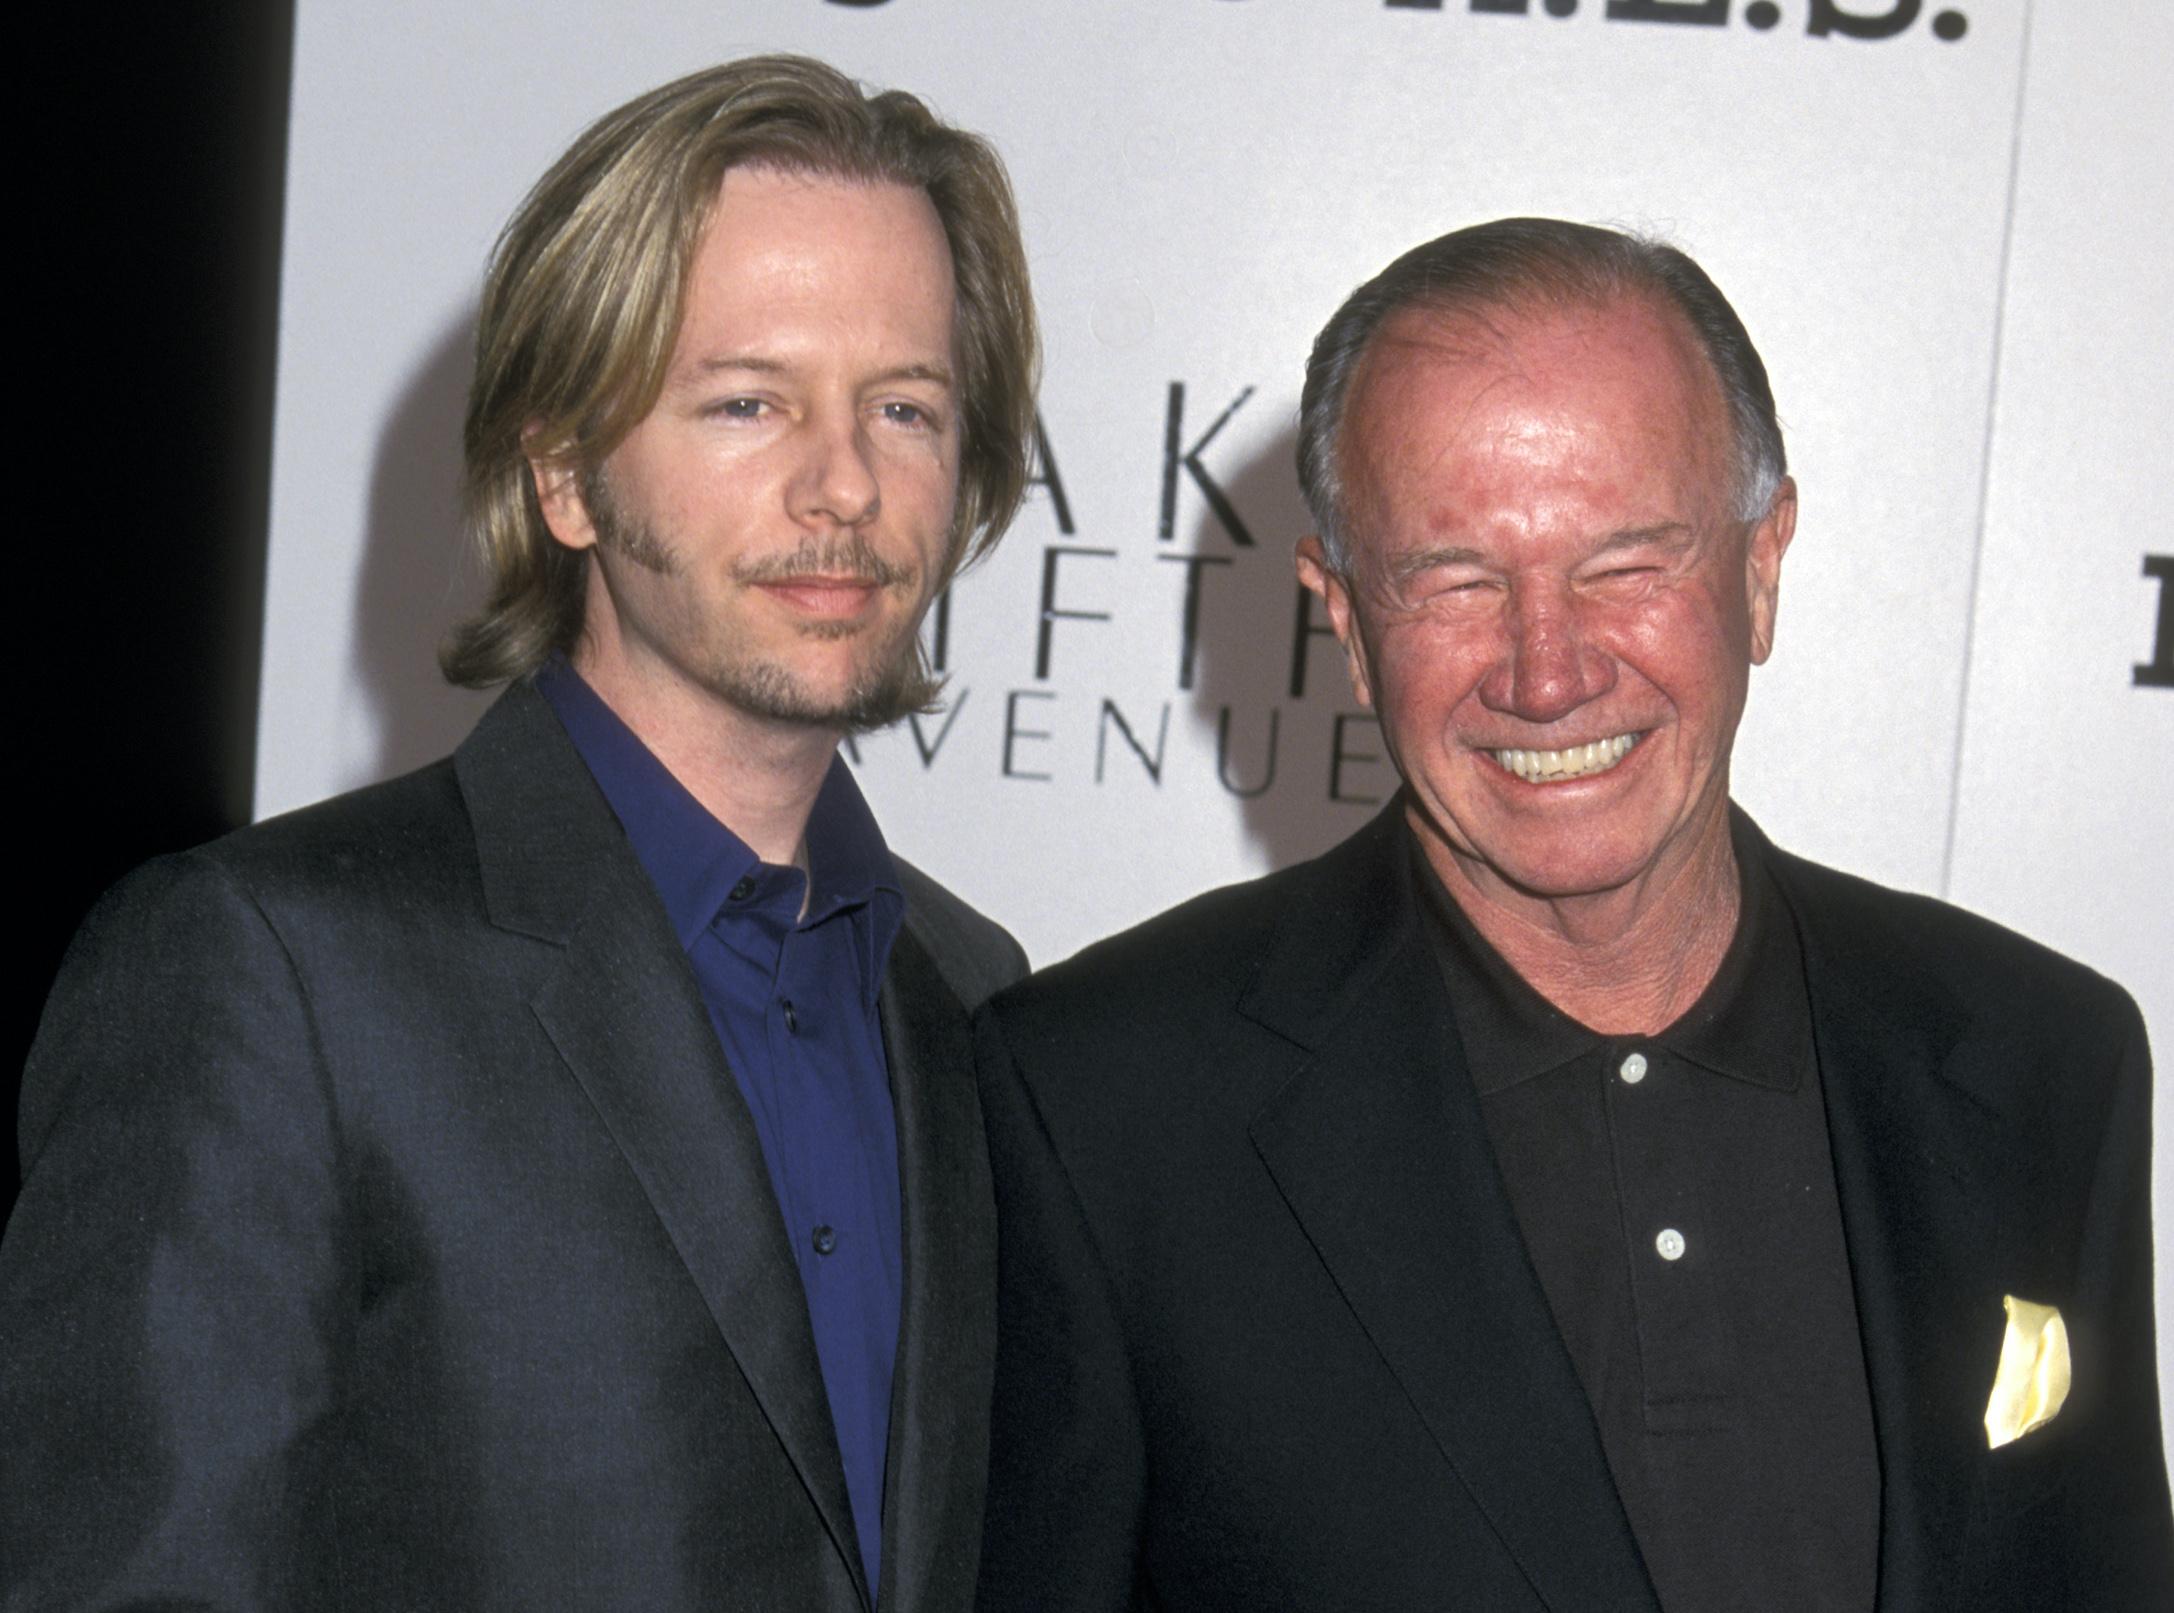 David Spade and his father Sam Spade at the 2nd Annual Saks 5th Avenue Project ALS. Benefit